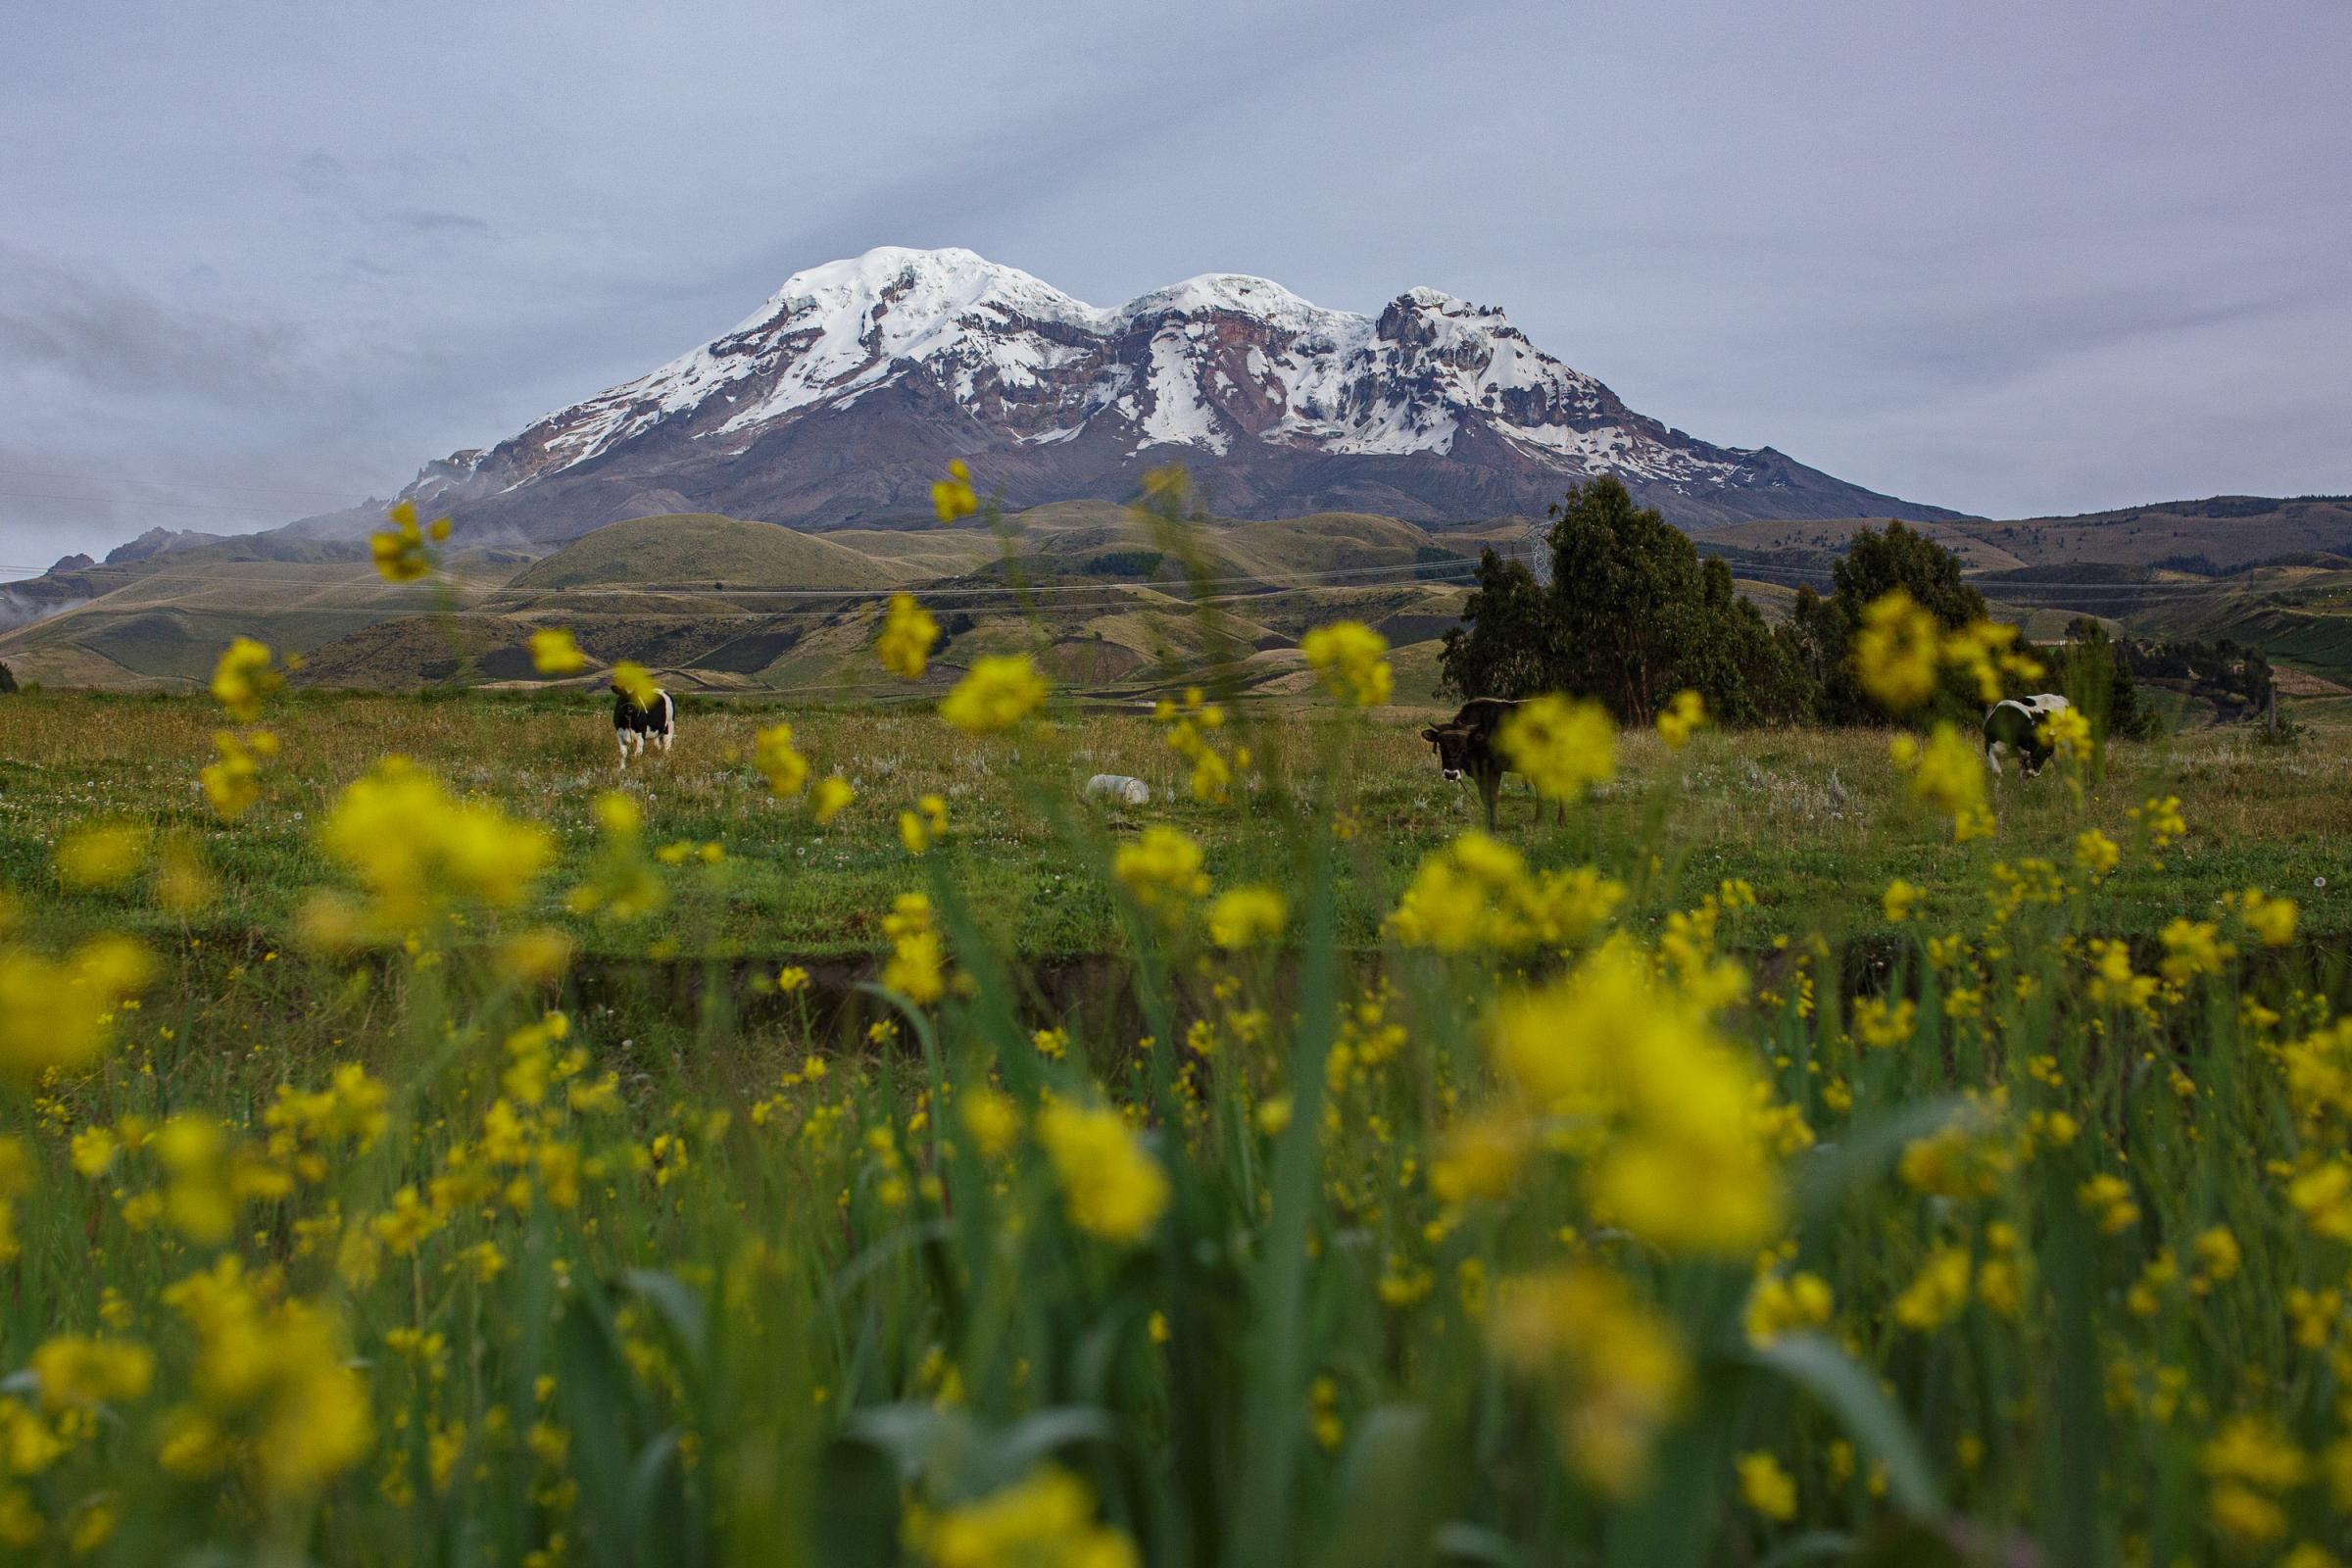 Der Eismann - The Chimborazo Volcano with its 6268 masl. If measured...